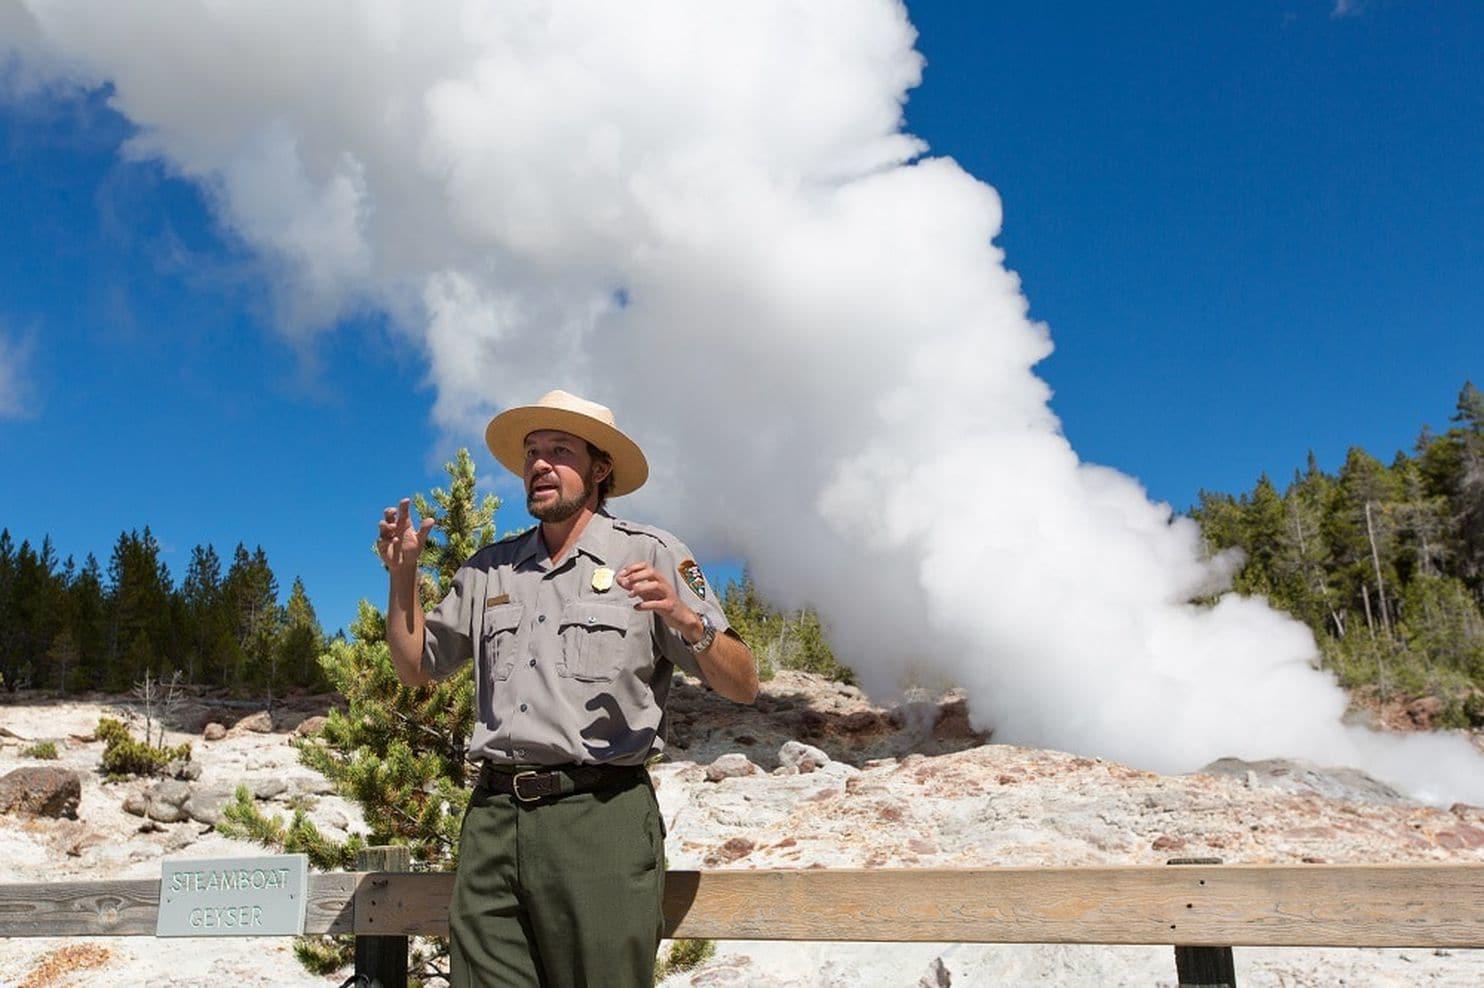 The steam phase of Steamboat Geyser, Yellowstone National Park/NPS 2014